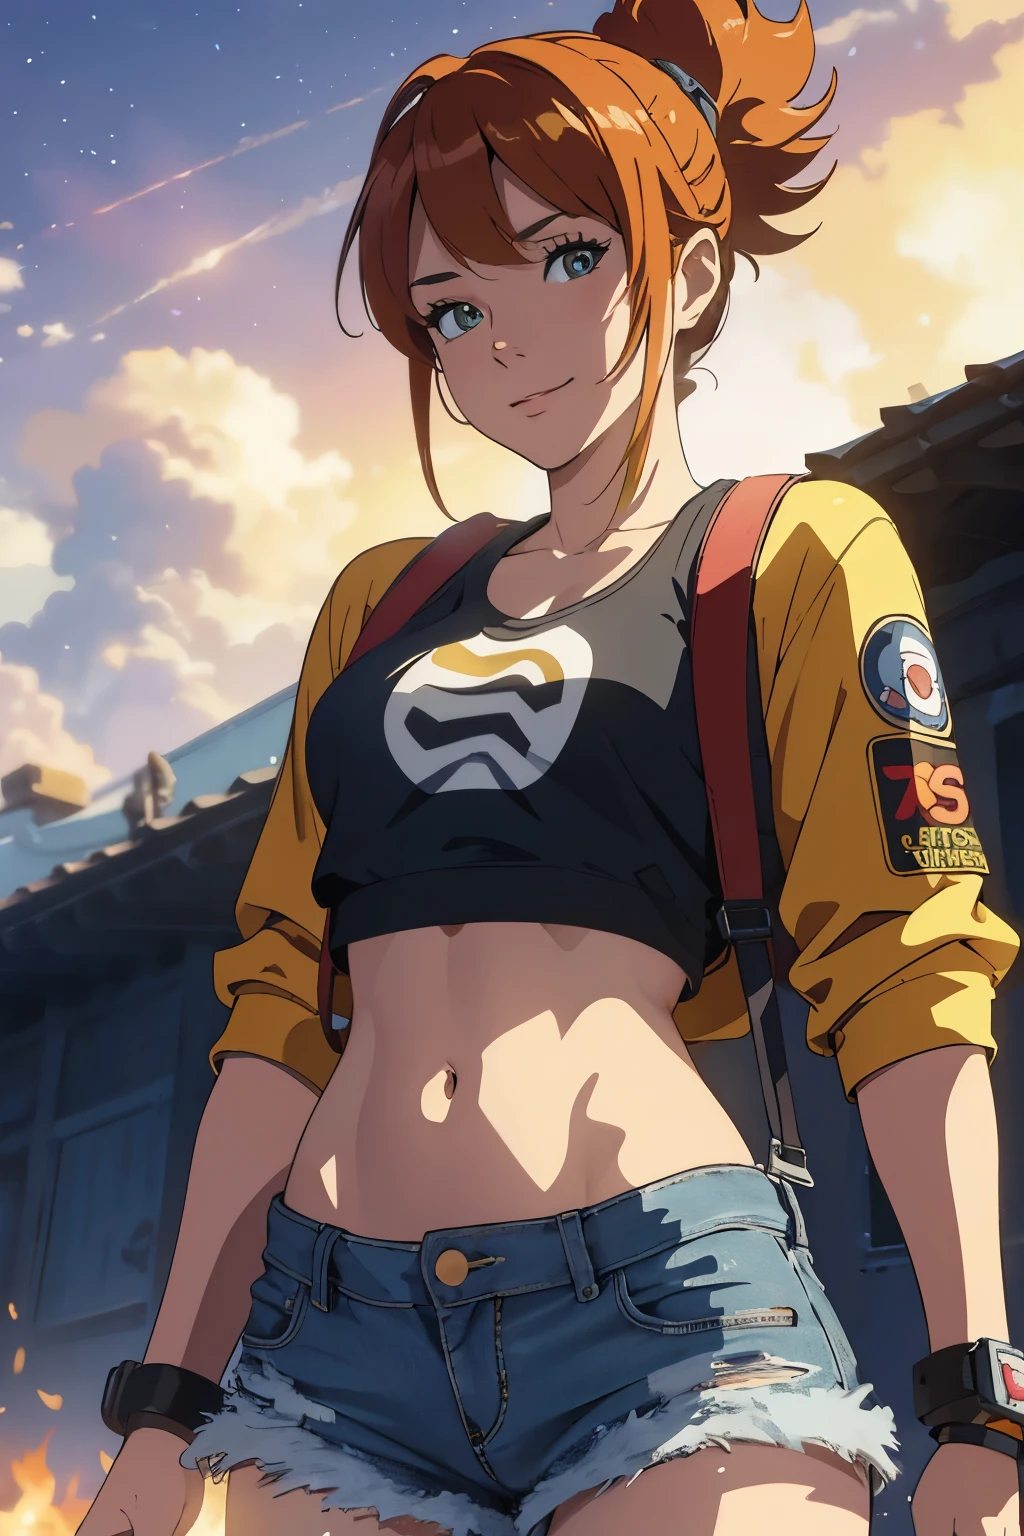 The centerpiece of the image is Misty from Pokémon, standing outdoors with a confident smile. Orange hair styled in a side ponytail, wearing denim shorts with suspenders, yellow crop top that shows off her midriff and navel. Yellow tank top. Cowboy shot posture exudes confidence and strength.

Misty is accompanied by a cute Dragon.

Overall, the image is a masterpiece, with high-quality details and a realistic rendering of Misty, her outfit, and her companion dragon. The colors are vivid and eye-catching, and the image is high-resolution, capturing every nuance of Misty's confident and adventurous spirit.